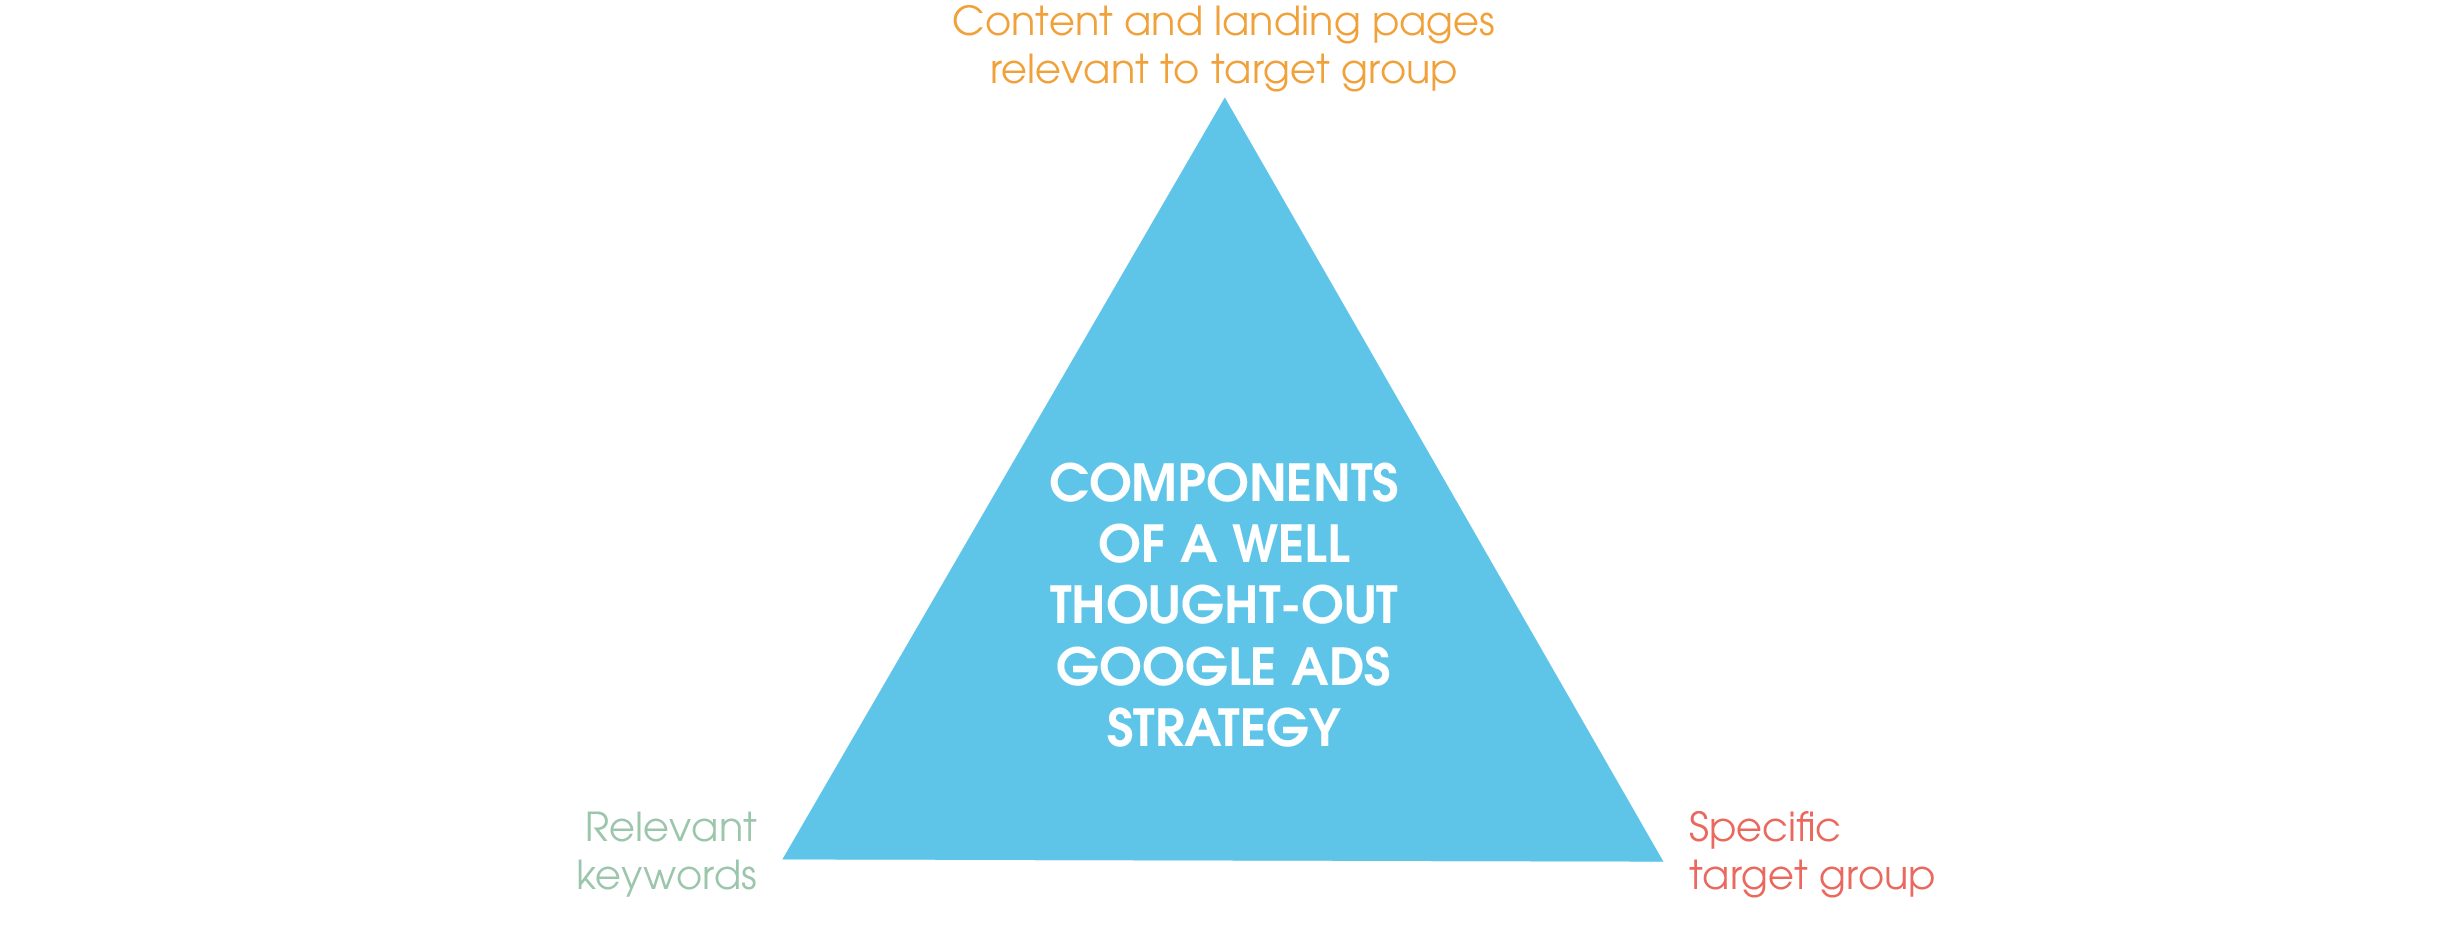 On the picture you can see a triangle, at the tips of which you can find the components of a well thought-out Google Ads strategy. These include:
- a specific target group
- relevant keywords
- target group-specific and relevant content and landing pages.